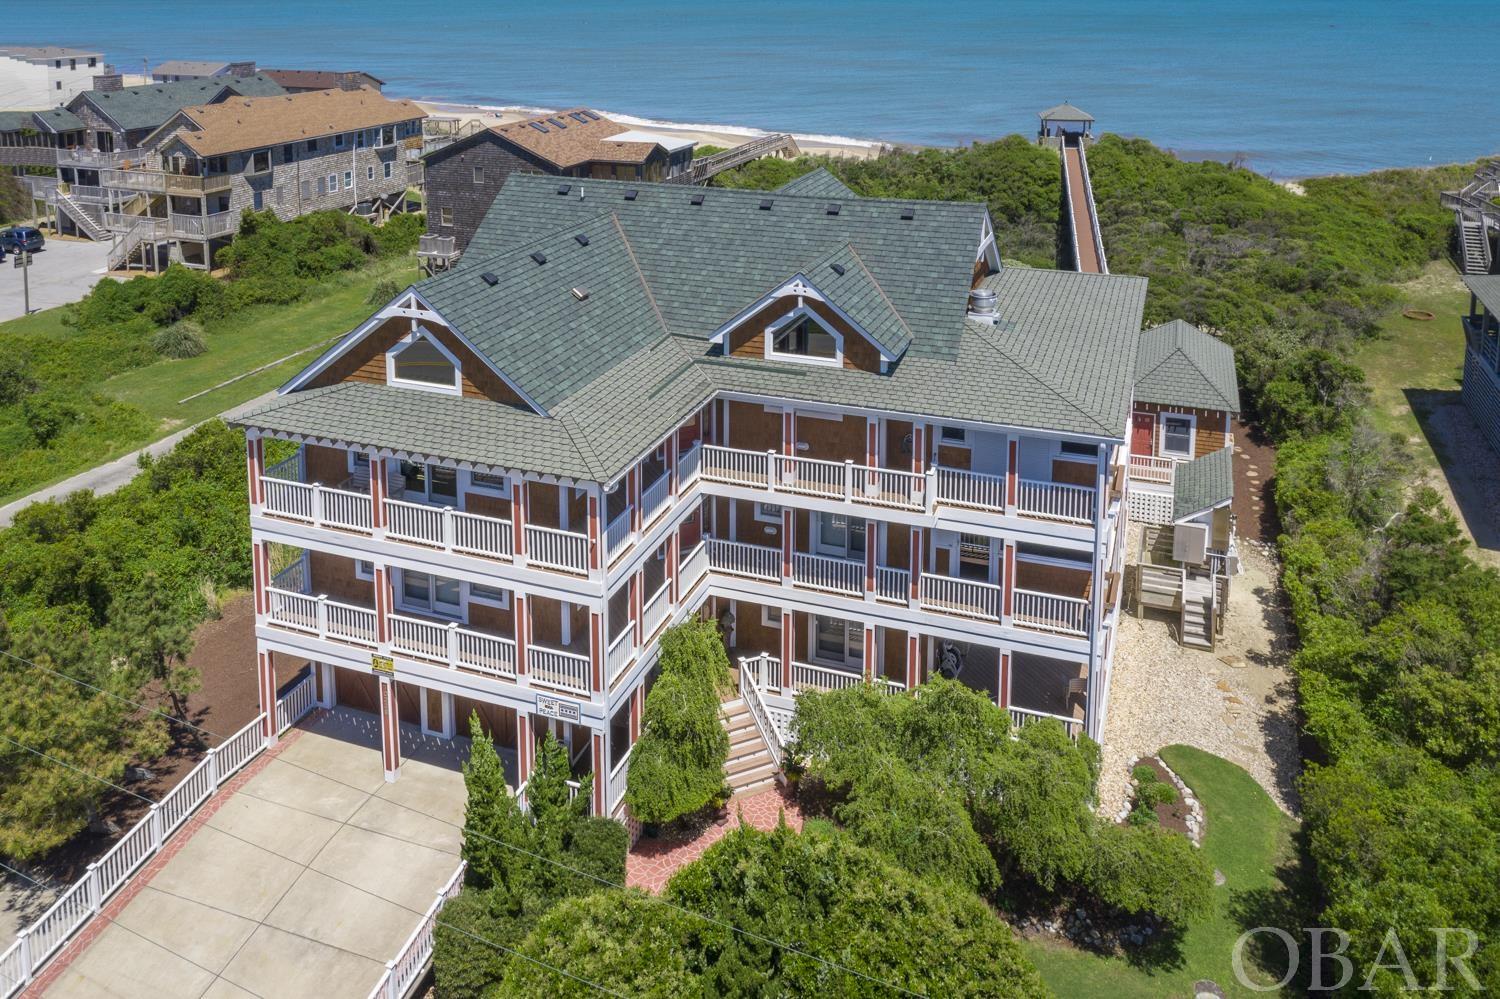 Surrounded by a beautifully landscaped yard, and referenced by Dare County Tax records as a: "Modern Oceanfront Estate."... it would take pages to describe just how incredible this 8 bedroom, 8 bath, oceanfront home is. The open living area with a vaulted ceiling is perfect for visiting with family and friends. Hoping for an updated kitchen that's tastefully designed? This house has it! Quartz countertops, a substantial island, sub-zero refrigerator, gas range with hood and plenty of storage. Step out from the lovely dining area into a large screened-in porch with a built-in gas grill with an exhaust hood and an additional table for dining. From the porch you can see the sound to the west and the ocean to the east. While looking out at the ocean (from one of the multiple decks), your eyes will find the oversized pool (28 x 46) that includes a hot tub, kiddie pool and baja shelf for relaxing in lounge chairs. There is also an outdoor brick fireplace to enjoy for the chilly beach evenings. For those who like to work-out before hitting the beach, no problem...there's an out building with exercise equipment. Other amenities include a theatre room, a hot tub located on the mid-level deck, a recreation room on the ground floor and multiple large screen TV's throughout the house. If you're stuck doing laundry, you can be done in no time as there are 3 (yes, 3!) sets of washers and dryers. The bedrooms are spacious and the bathrooms are elegant. Other property details include an elevator to all 3 levels, mechanical shades, ice machine, and even a boardwalk to your very own gazebo that leads directly to the beach! This property is only 1.8 miles from the Hatteras National Seashore. Let your dreams begin now!